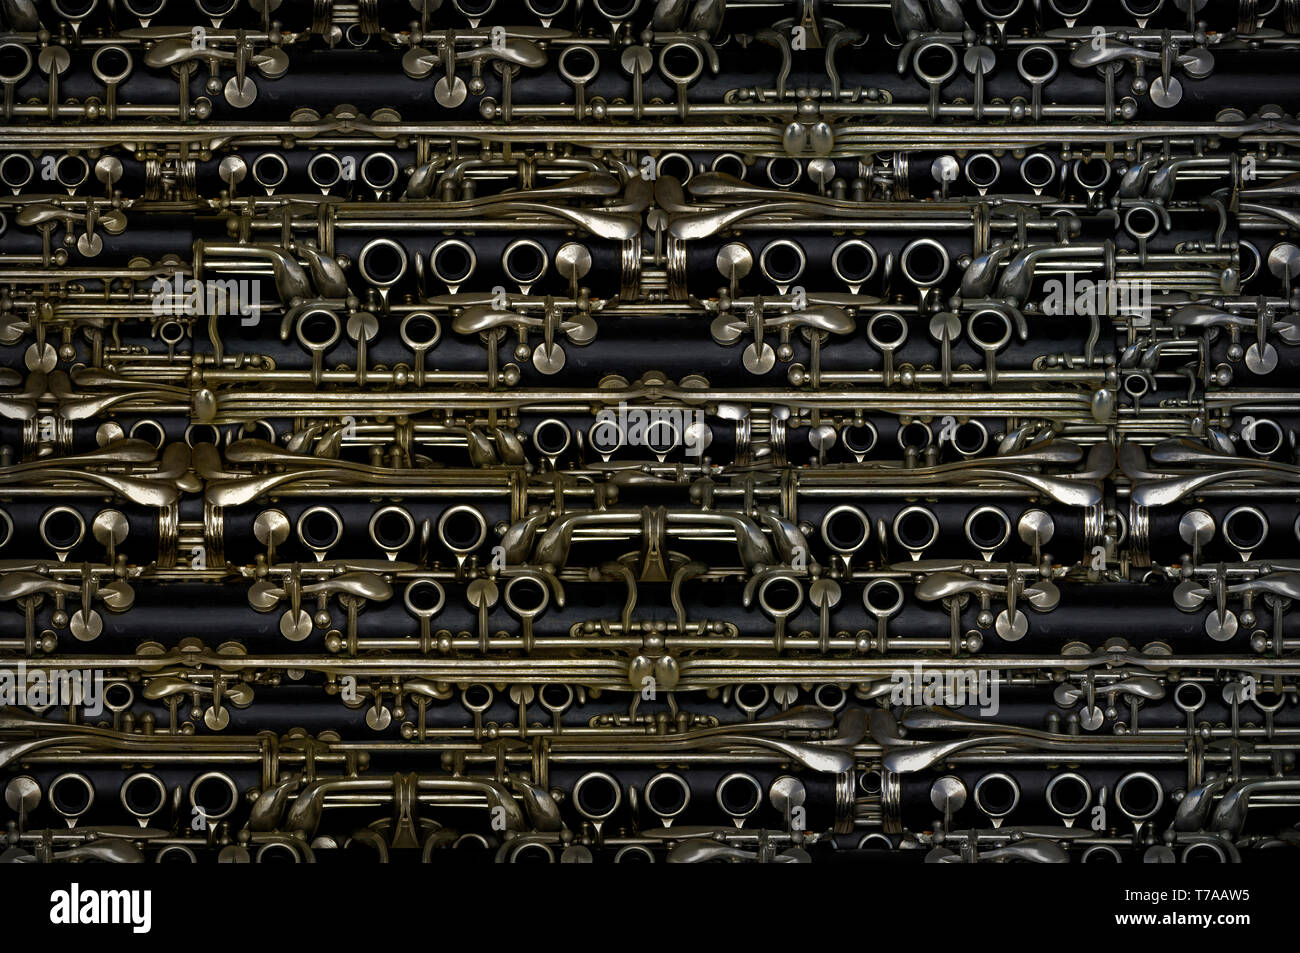 Parts of a clarinet used repeatedly to create a background pattern. Stock Photo